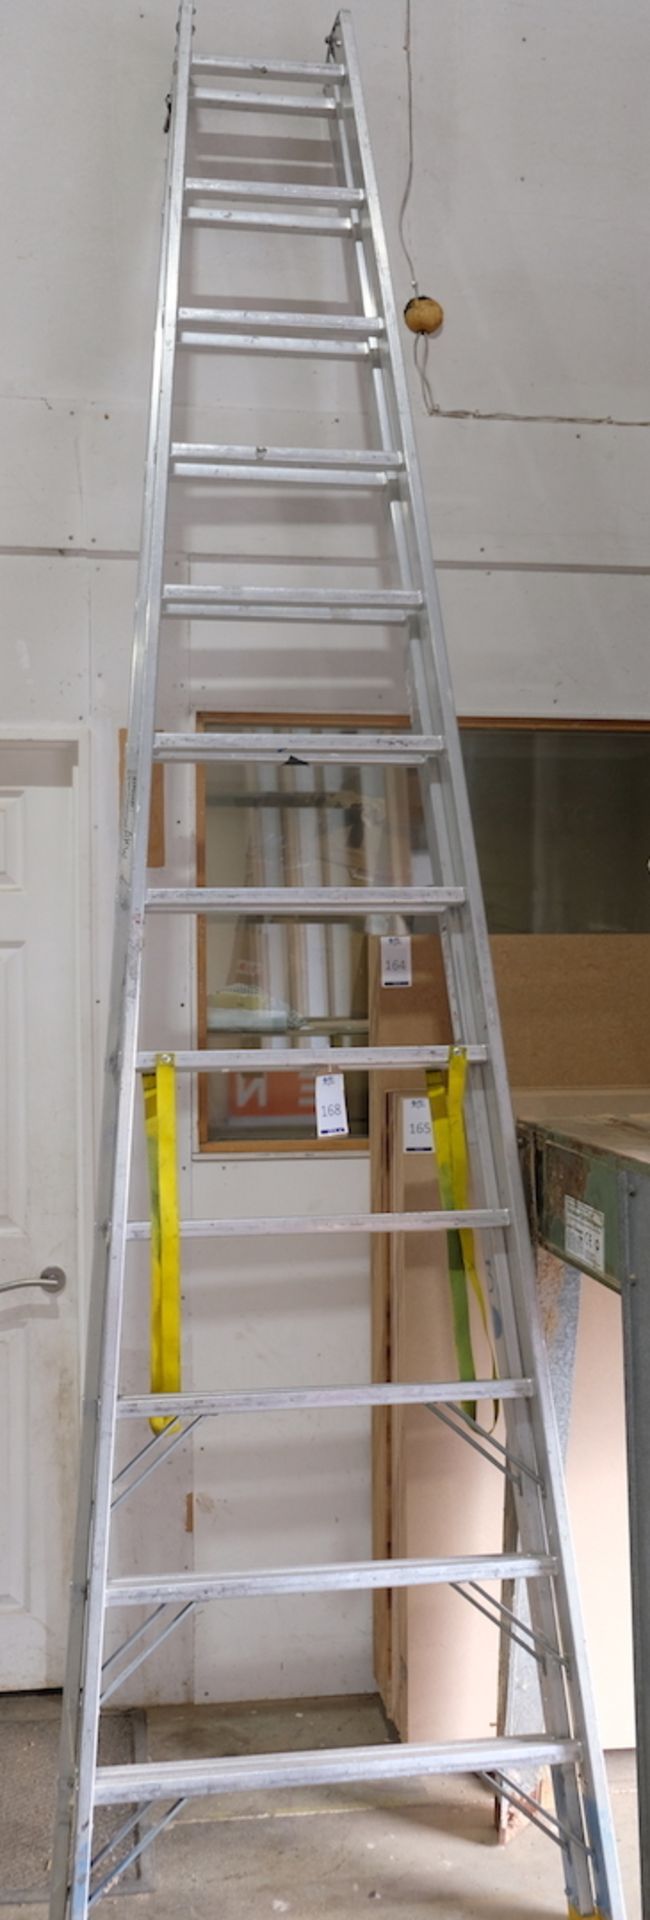 12 Rung HACA Leitern 3.49m Stepladder, 150kg (Located Bicester, See General Notes for More Details)